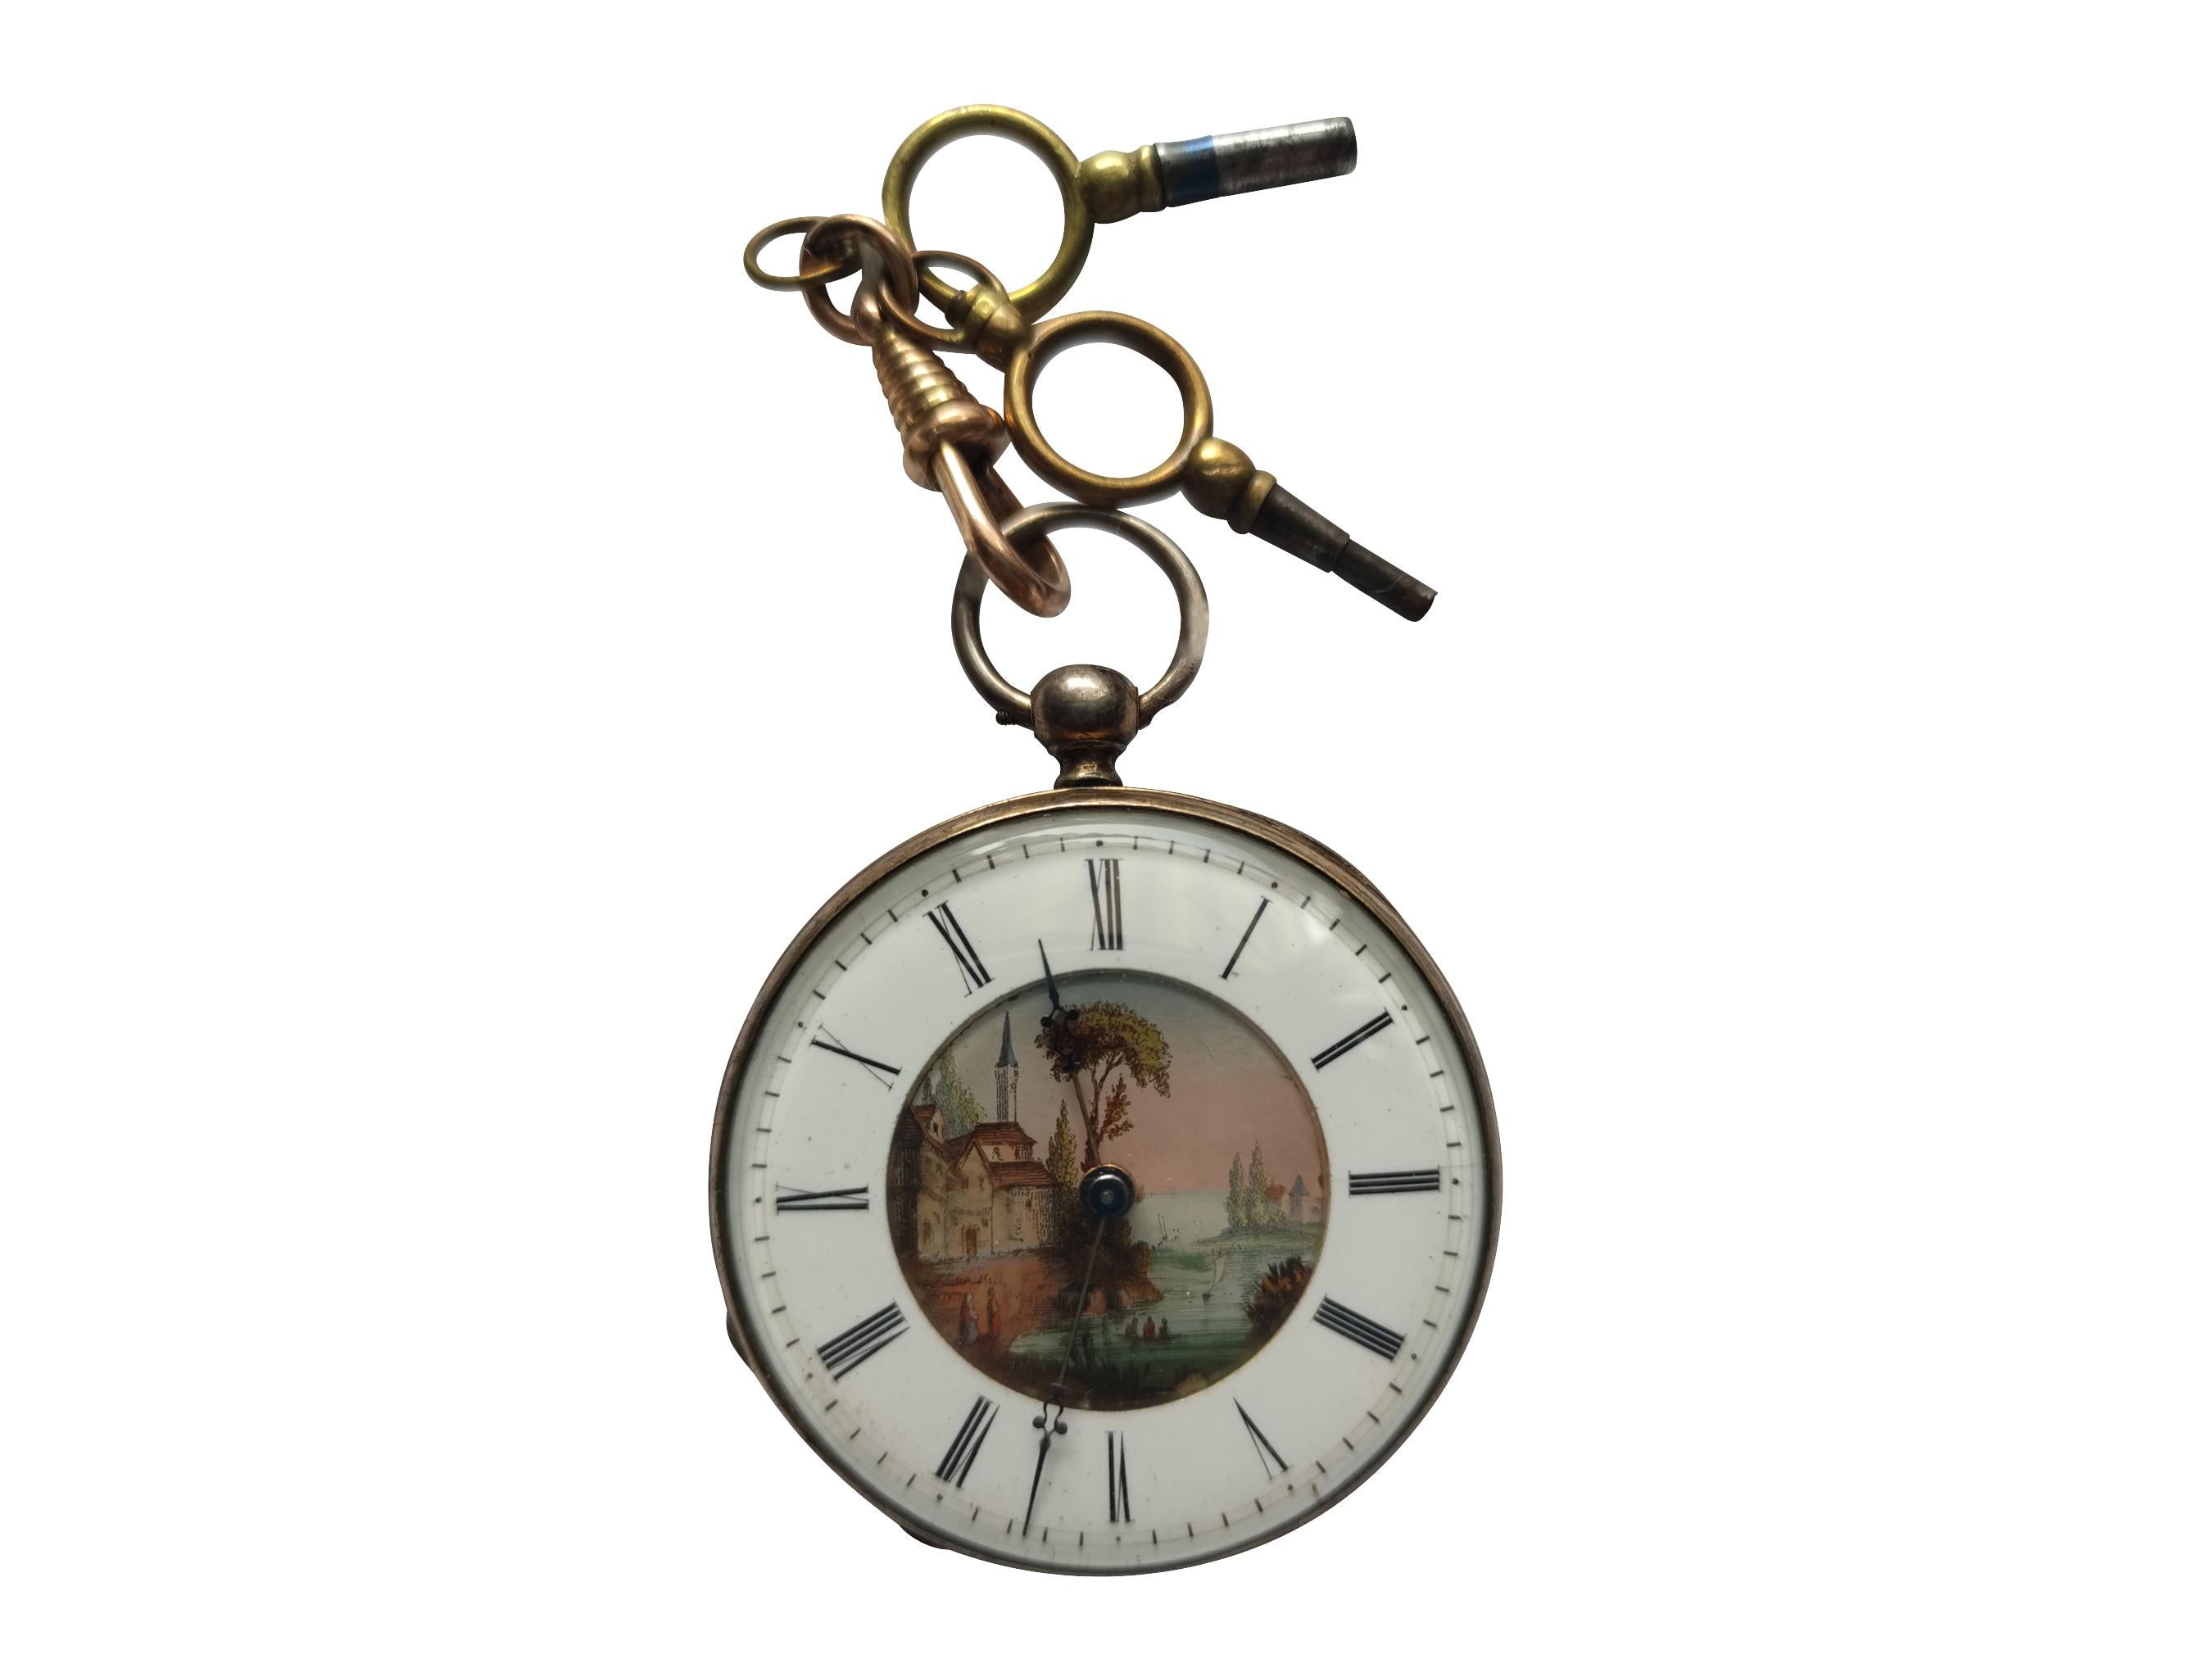 Rare Antique Pocket Key Watch French 1800s with Painted Enamel Dial For Sale 7